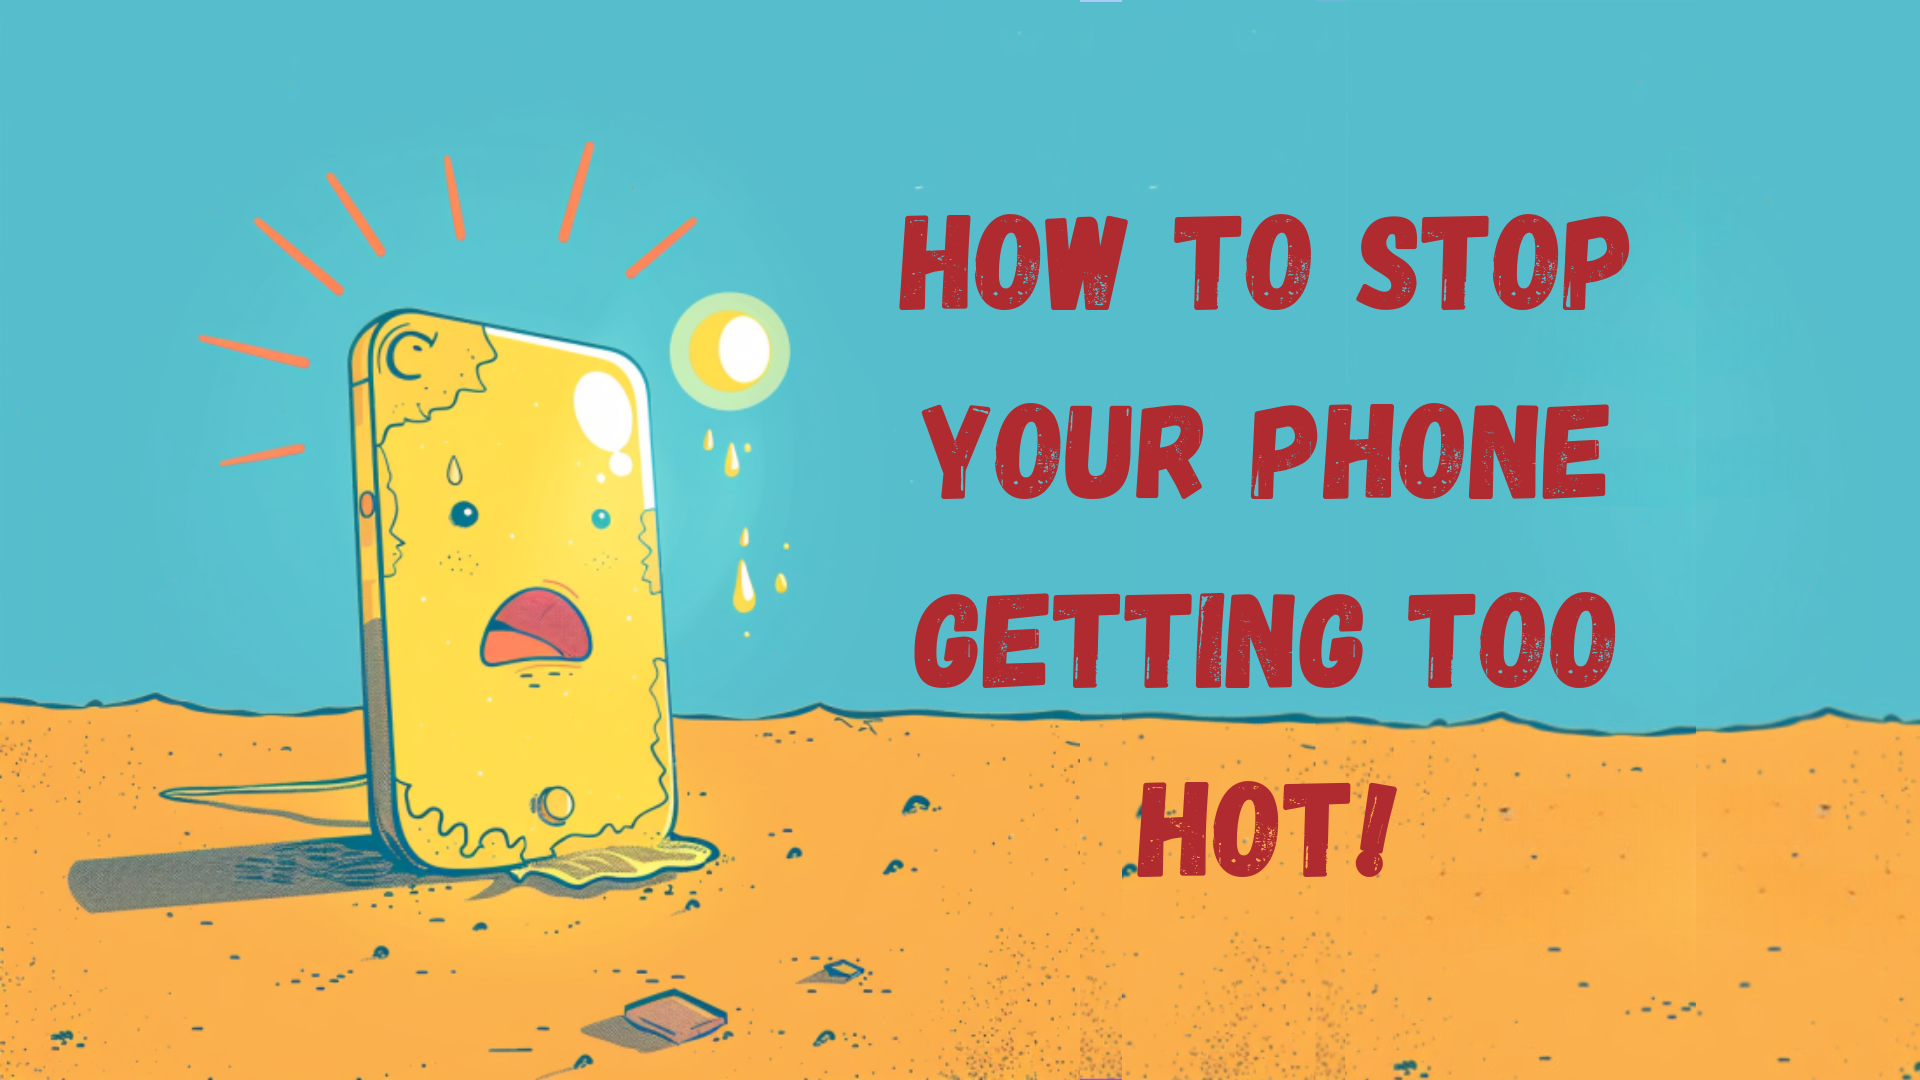 How to stop your phone getting too hot!